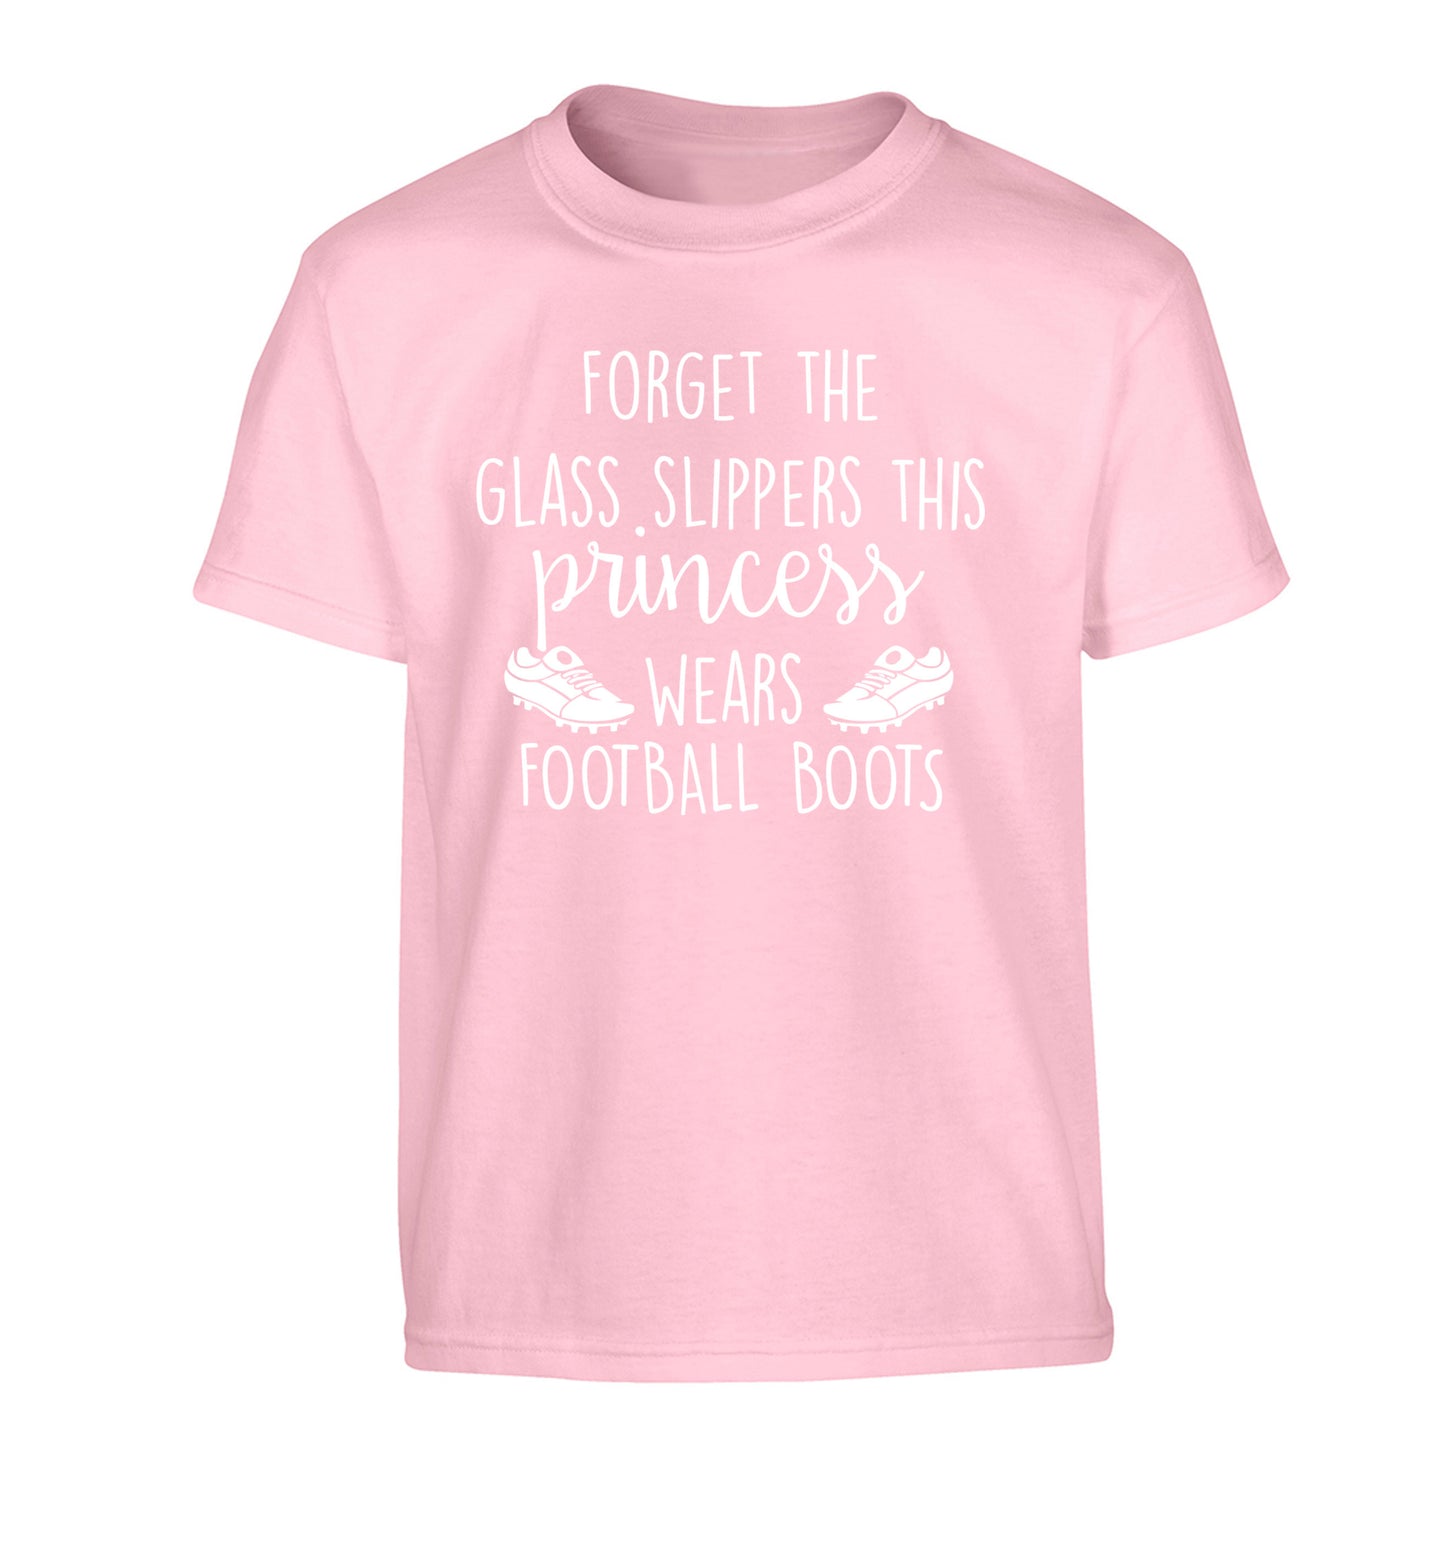 Forget the glass slippers this princess wears football boots Children's light pink Tshirt 12-14 Years